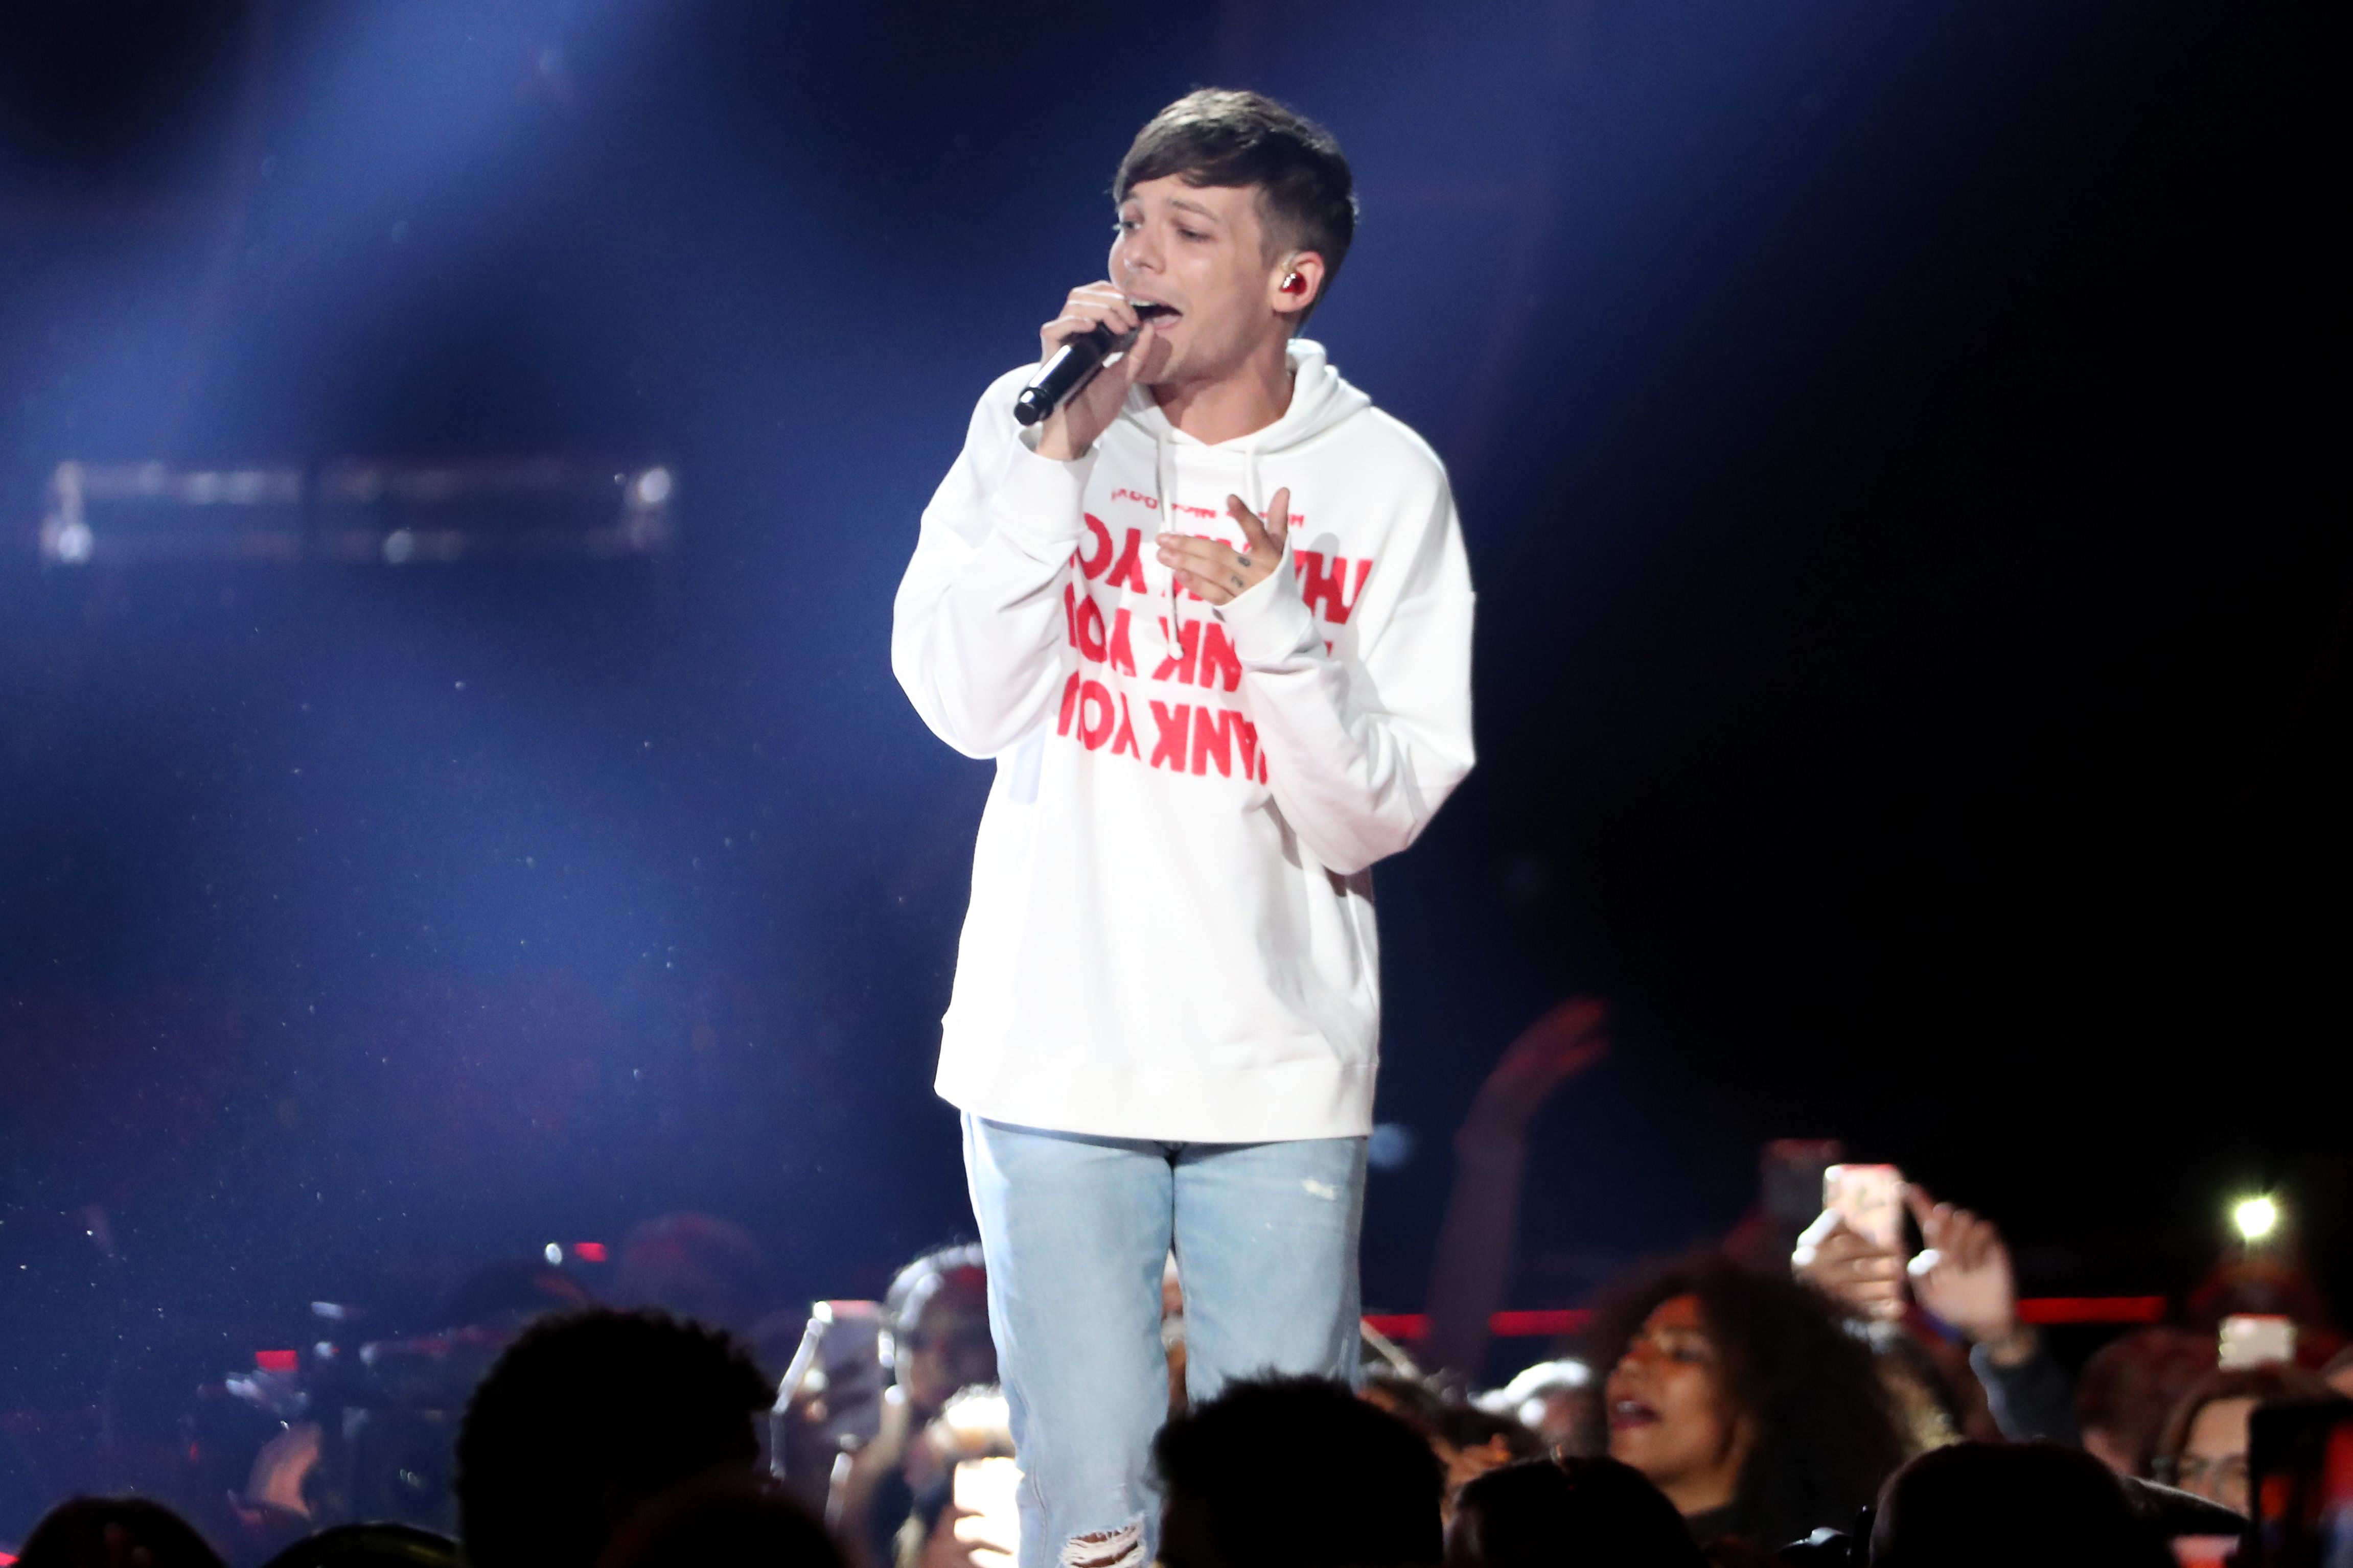 Louis Tomlinson releases music video 'Two of Us,' inspired by loss